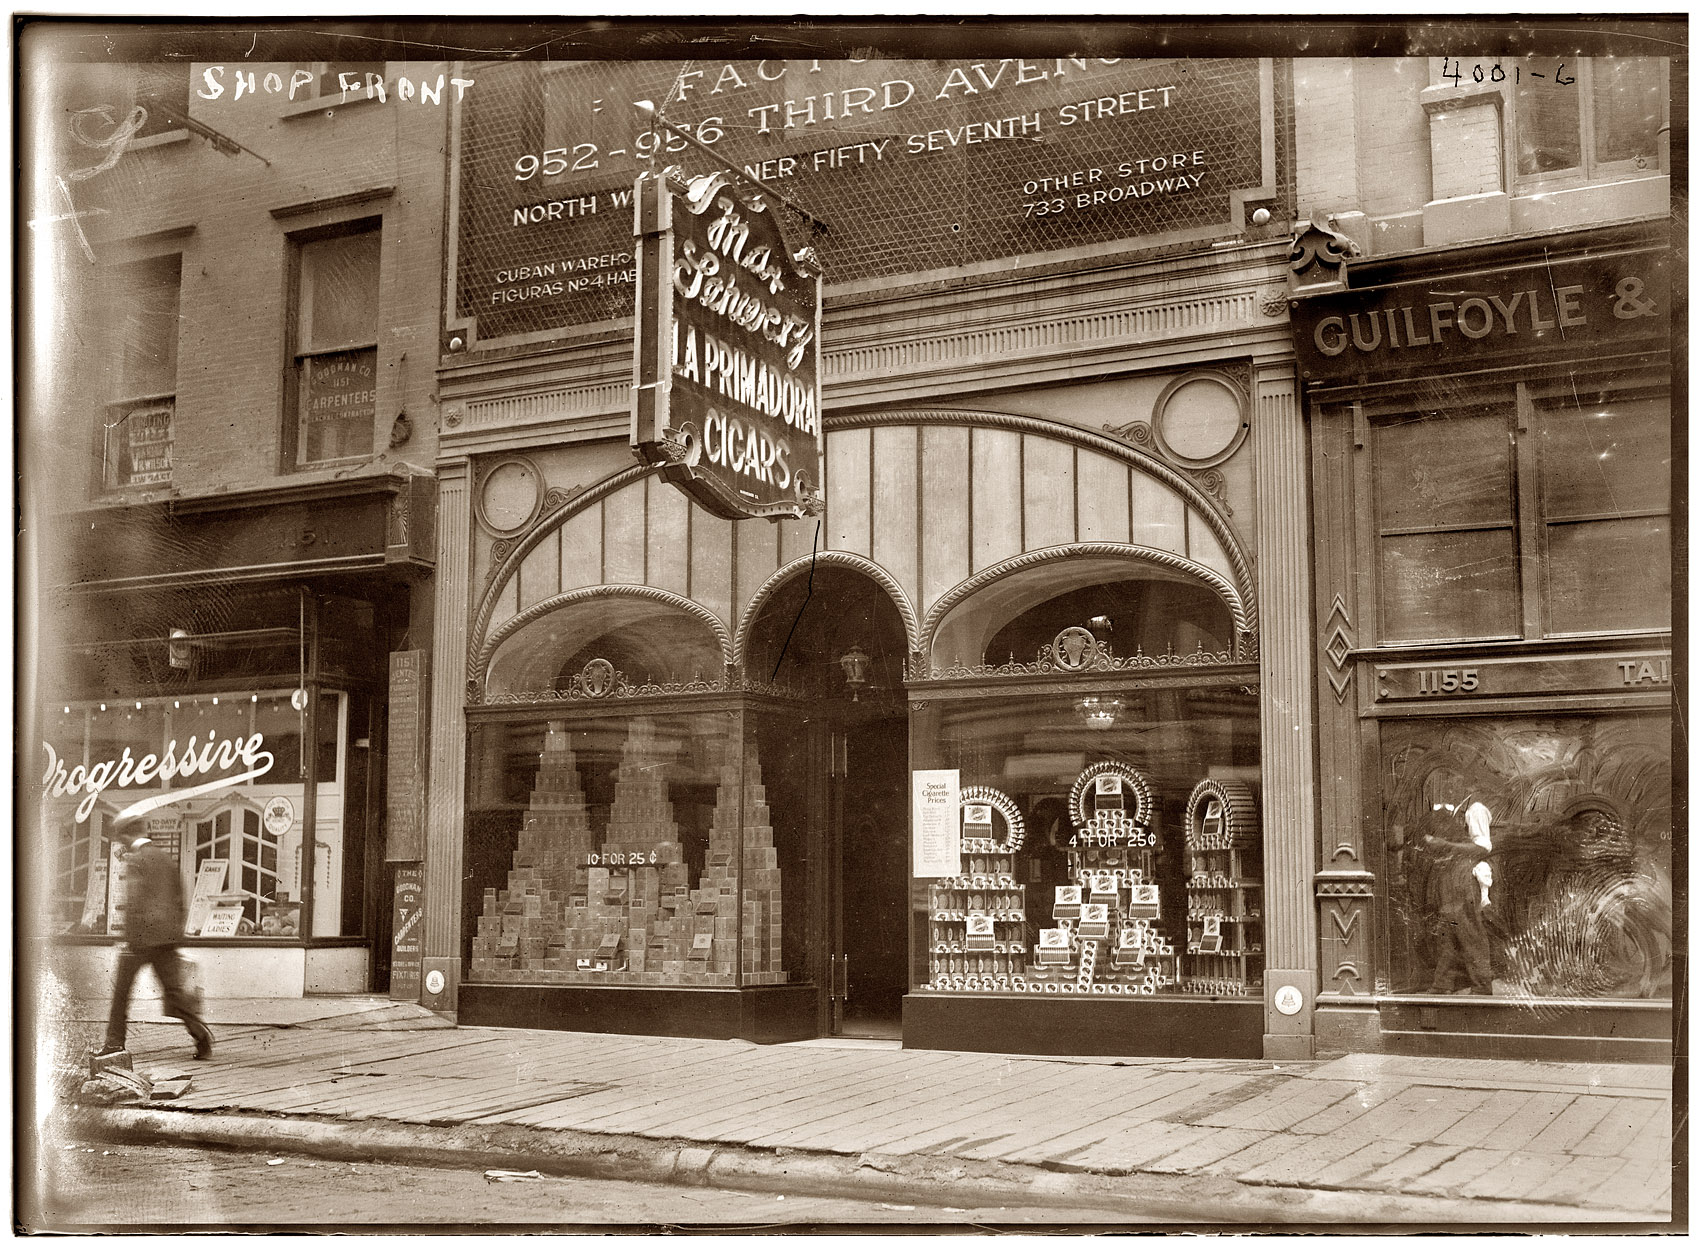 Another view of the Primadora cigar shop, with a lunchroom, furrier, carpenter and men's clothier as neighbors. View full size. Geo. Grantham Bain Collection.